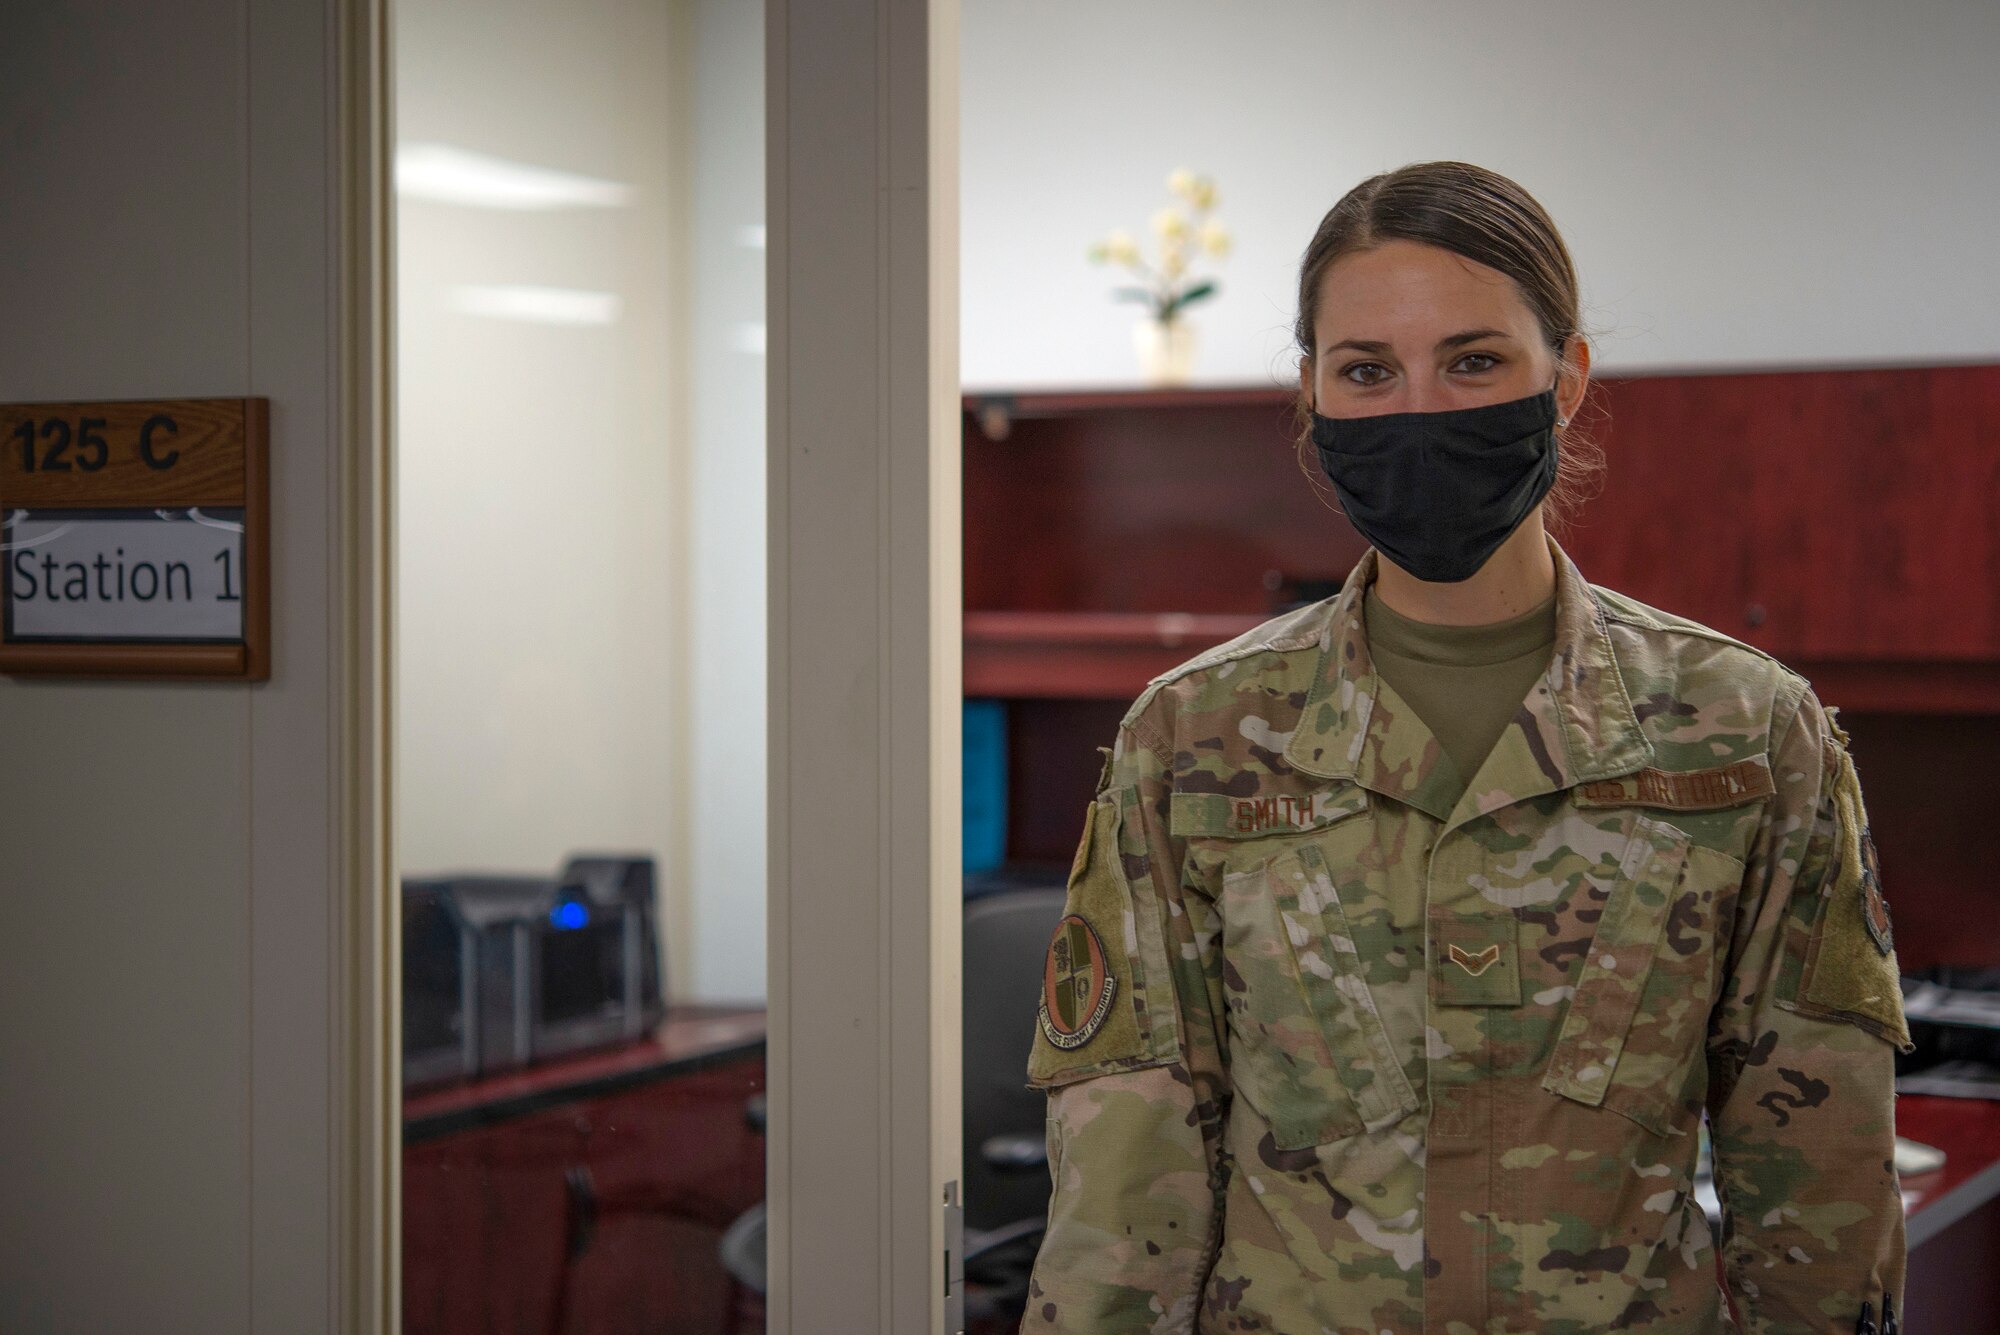 Airman 1st Class Jina Smith, 81st Force Support Squadron customer support apprentice, poses for a photo inside the Sablich Center at Keesler Air Force Base, Mississippi, May 19, 2020. Smith went through basic military training during the height of the COVID-19 pandemic. (U.S. Air Force photo by Senior Airman Kimberly L. Mueller)